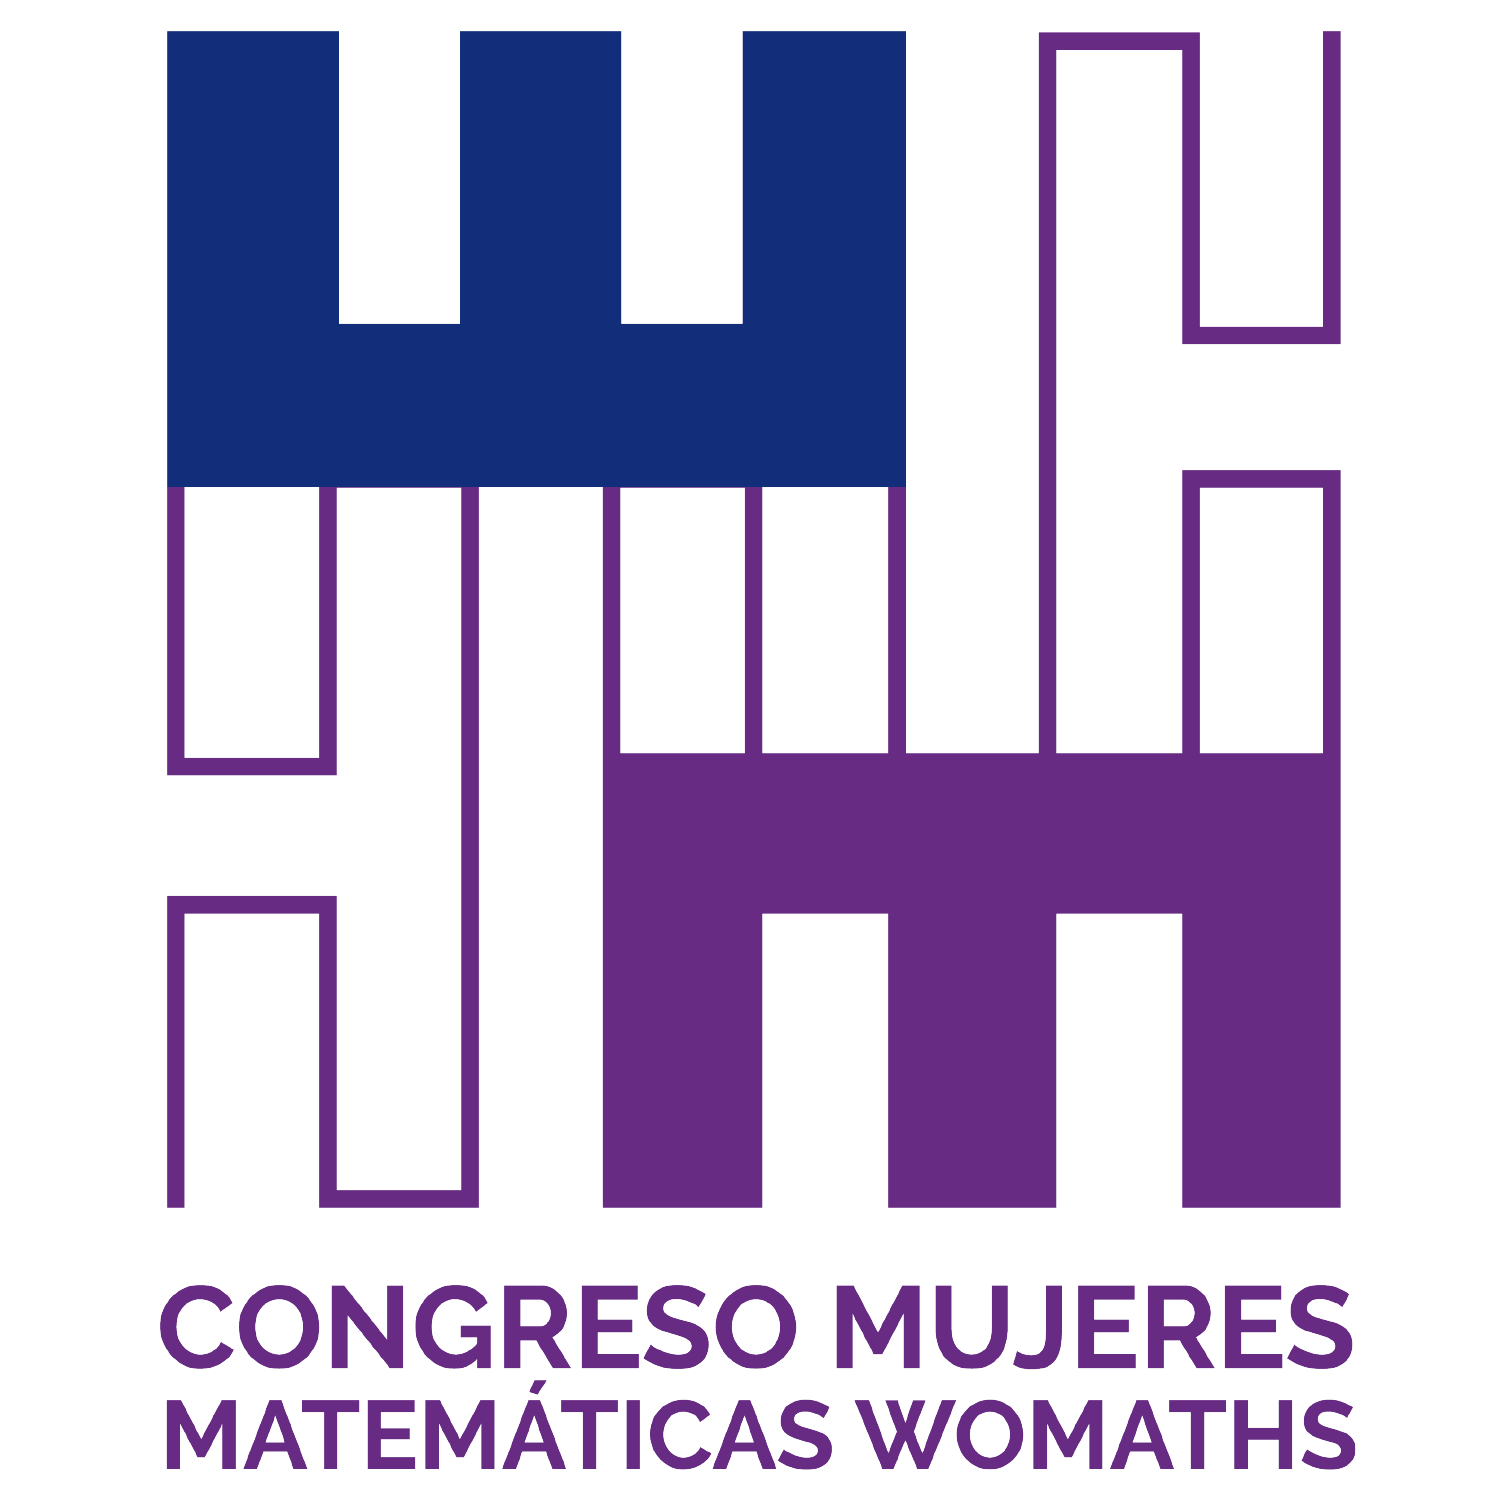 Womaths logo with two letters on a diagram inspired by a Peano diagram, a W in blue and an M in purple, alluding to the name of Congress